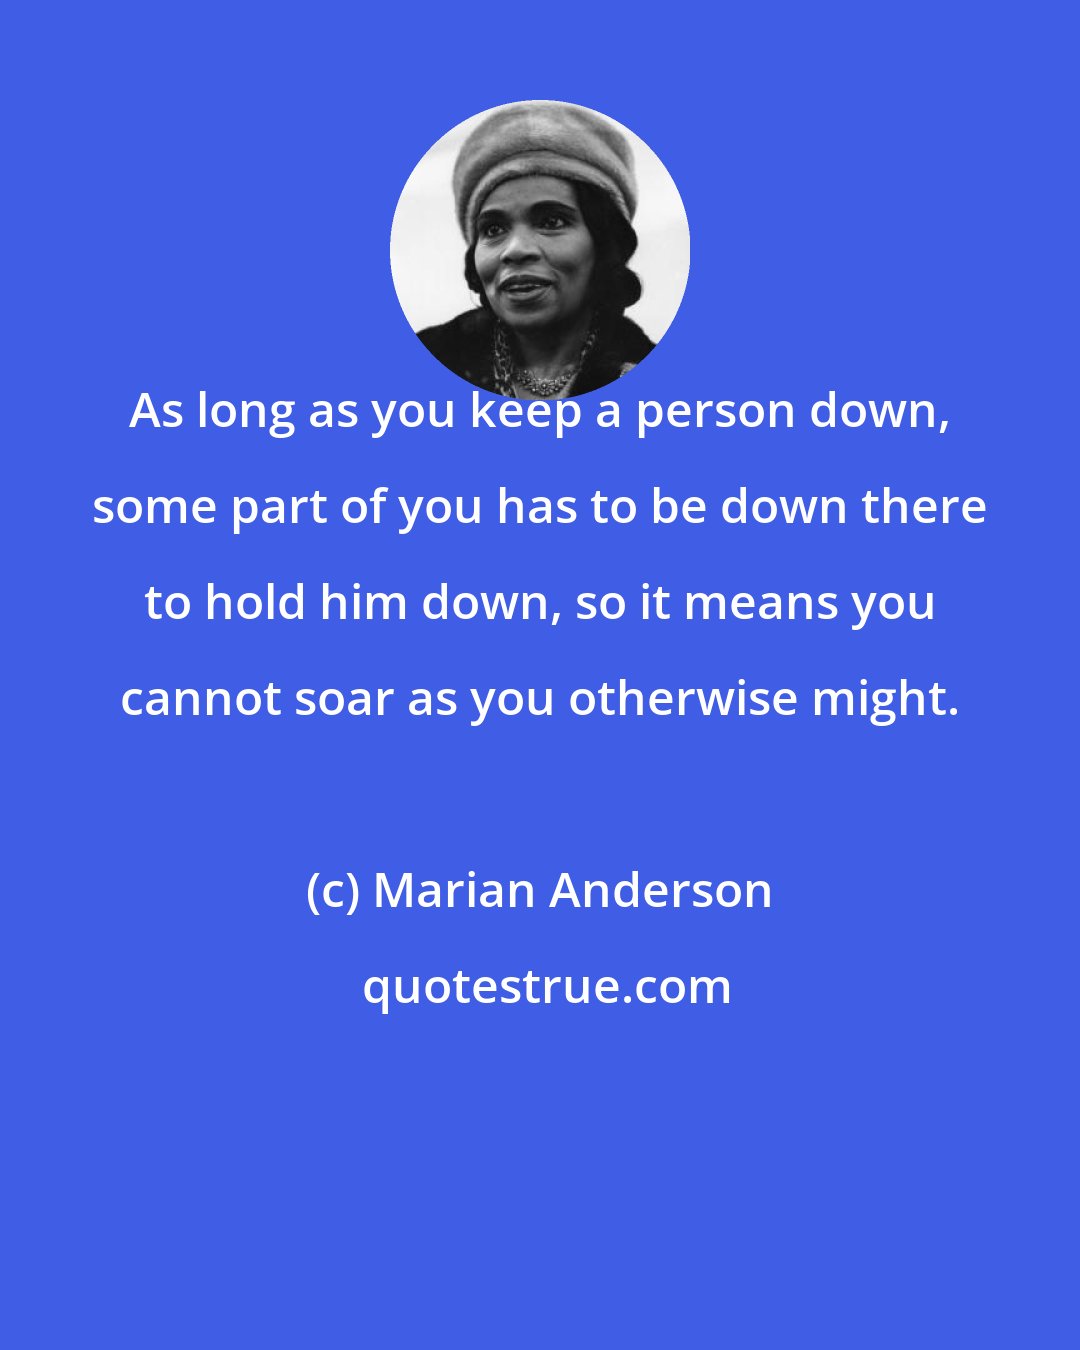 Marian Anderson: As long as you keep a person down, some part of you has to be down there to hold him down, so it means you cannot soar as you otherwise might.